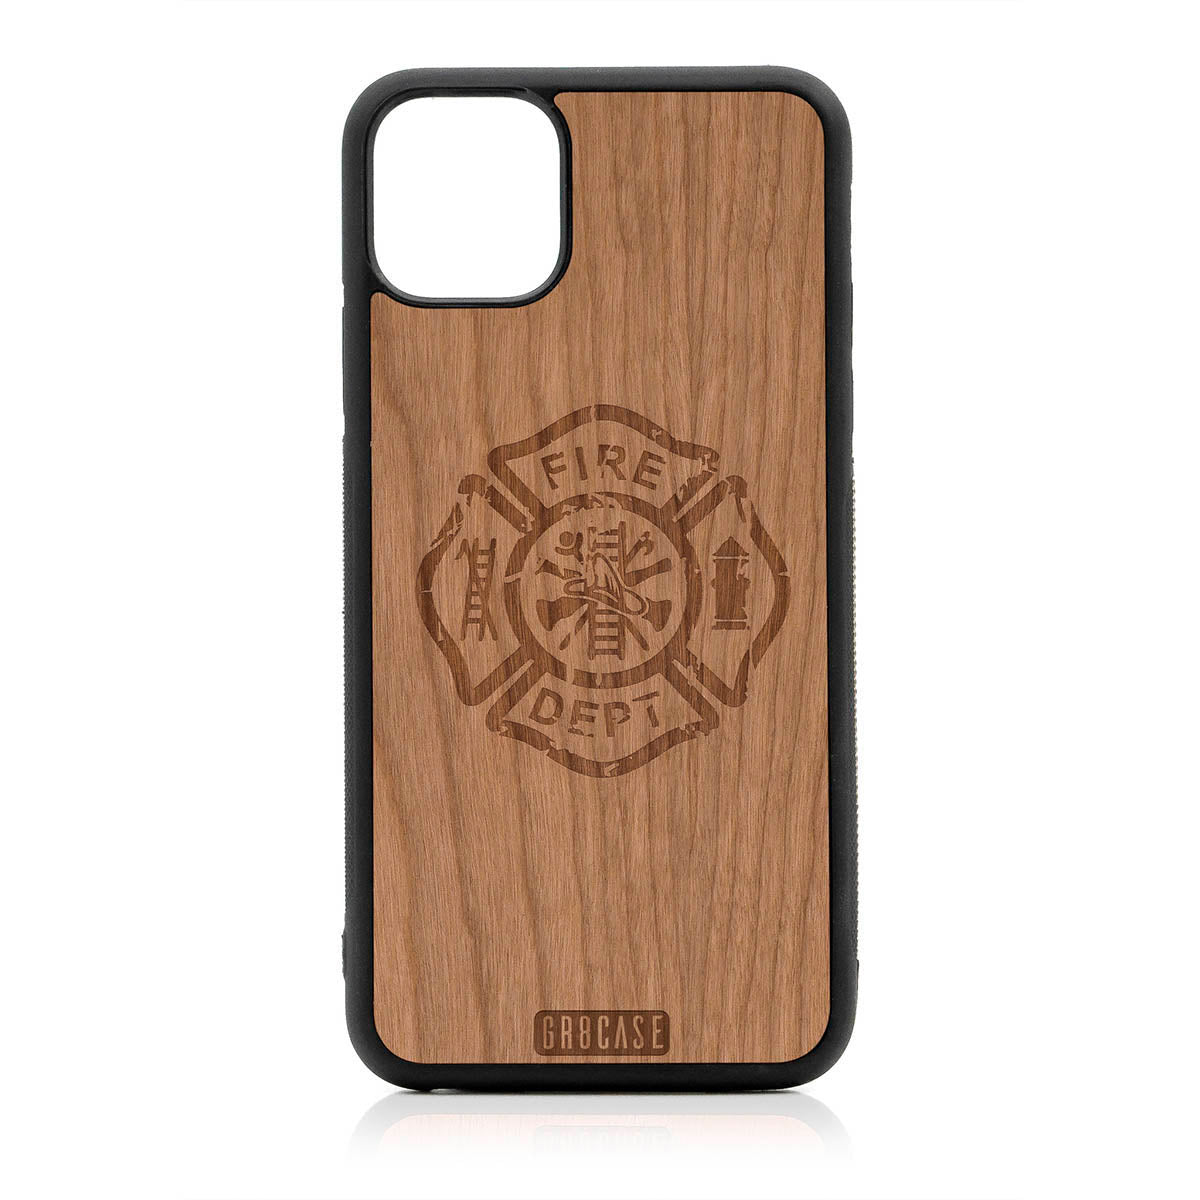 Fire Department Design Wood Case For iPhone 11 Pro Max by GR8CASE